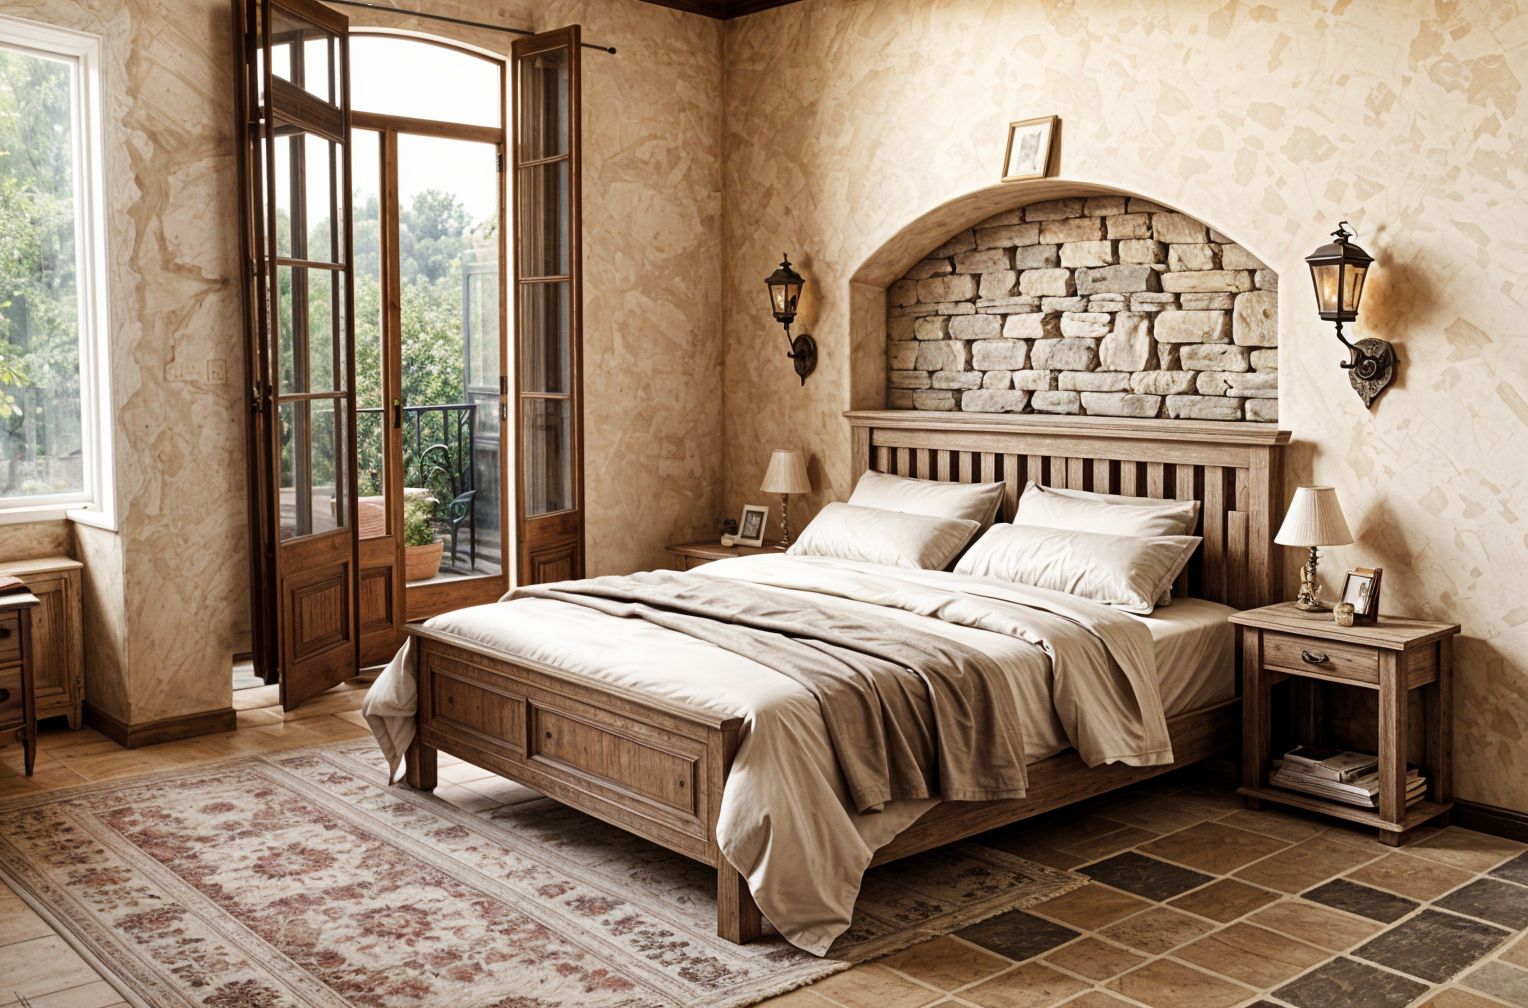 Tuscan style Bedroom